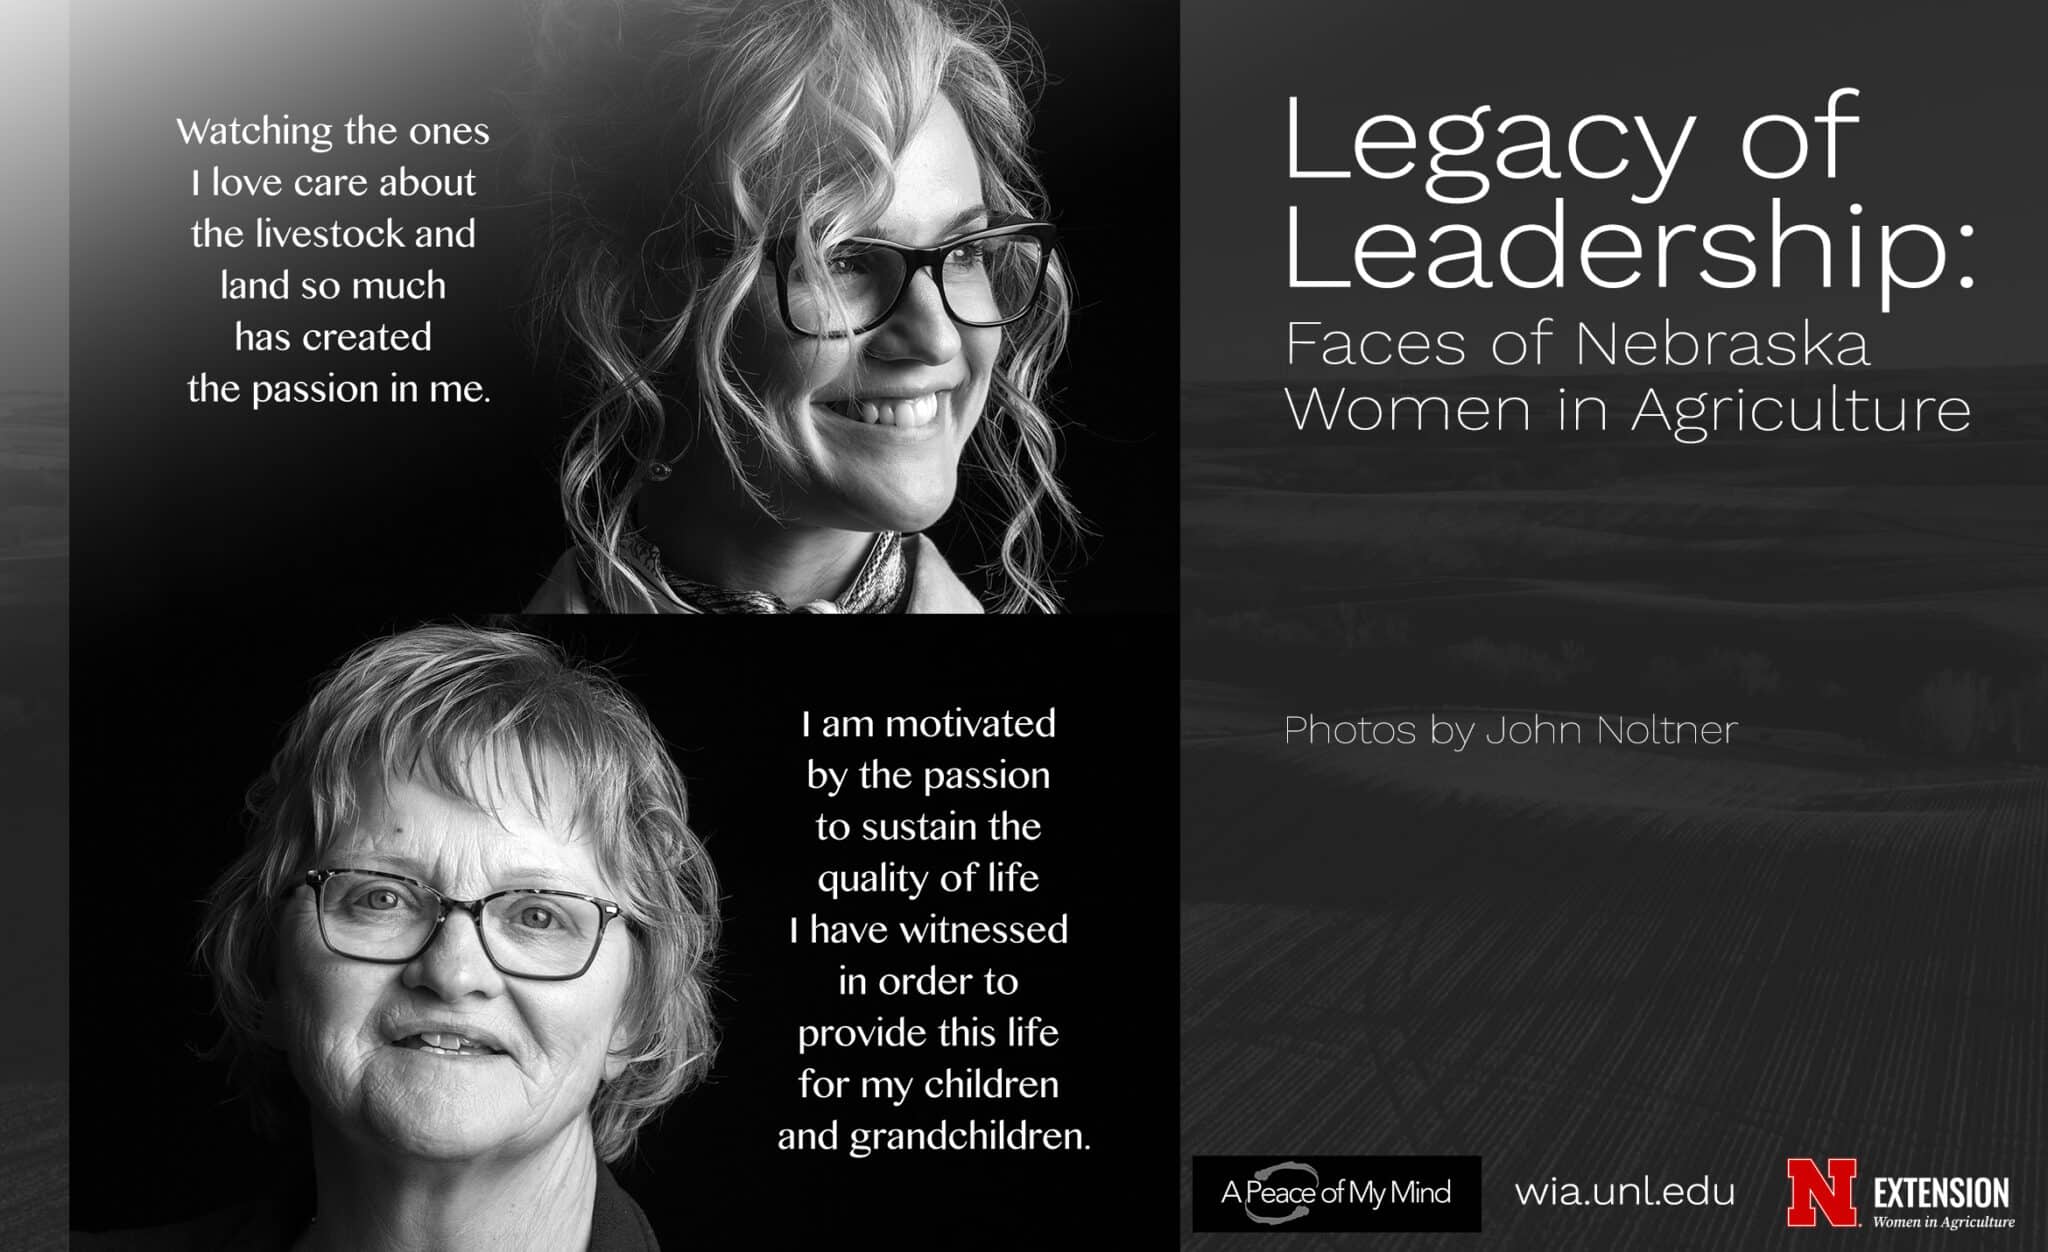 Image contains two women's portraits in black and white, each with a quote: "Wathcing the ones I love care about the livestock and land so much has created the passion in me." "I am motivated by the passion to sustain the quality of life I have witnessed in order to provide this life for my children and grandchildren."